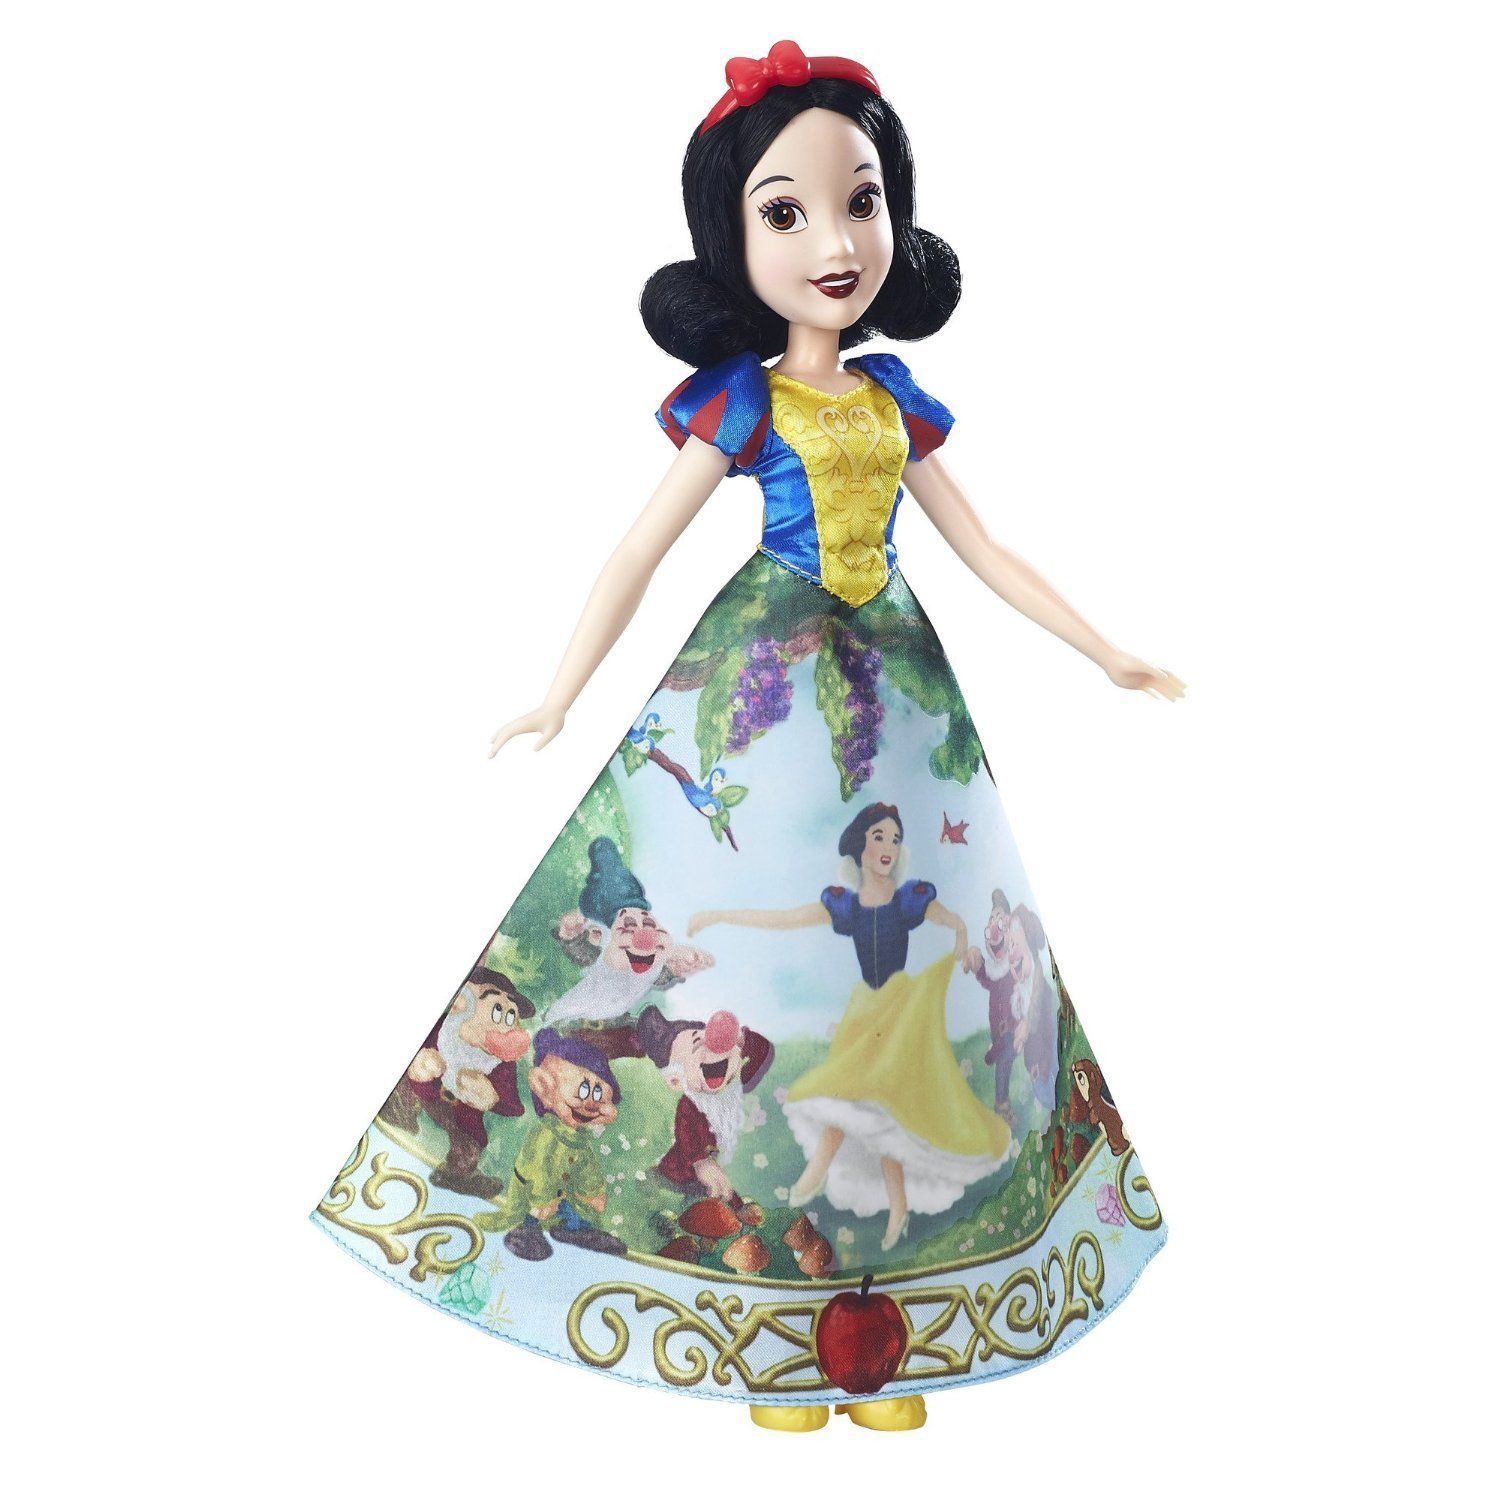 Disney Princess Snow White Magical Story Skirt Doll in Blue, Yellow by Hasbro